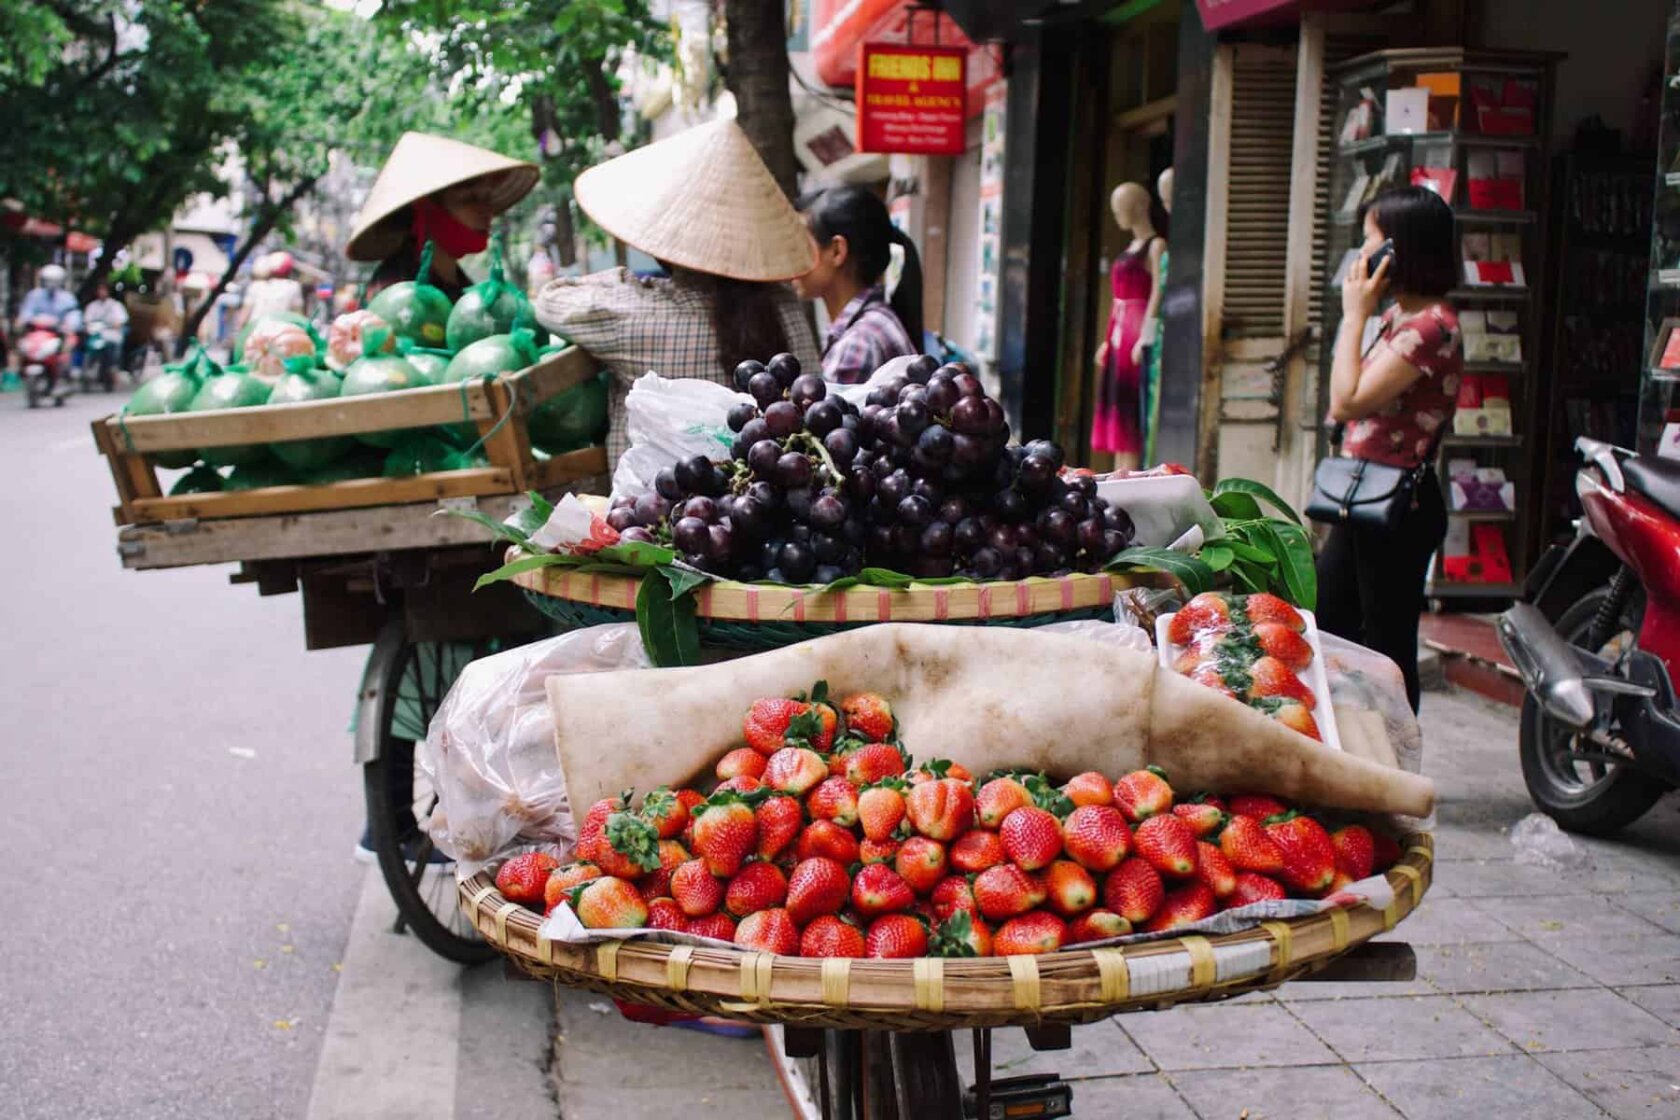 A fresh market in Hanoi with fruits